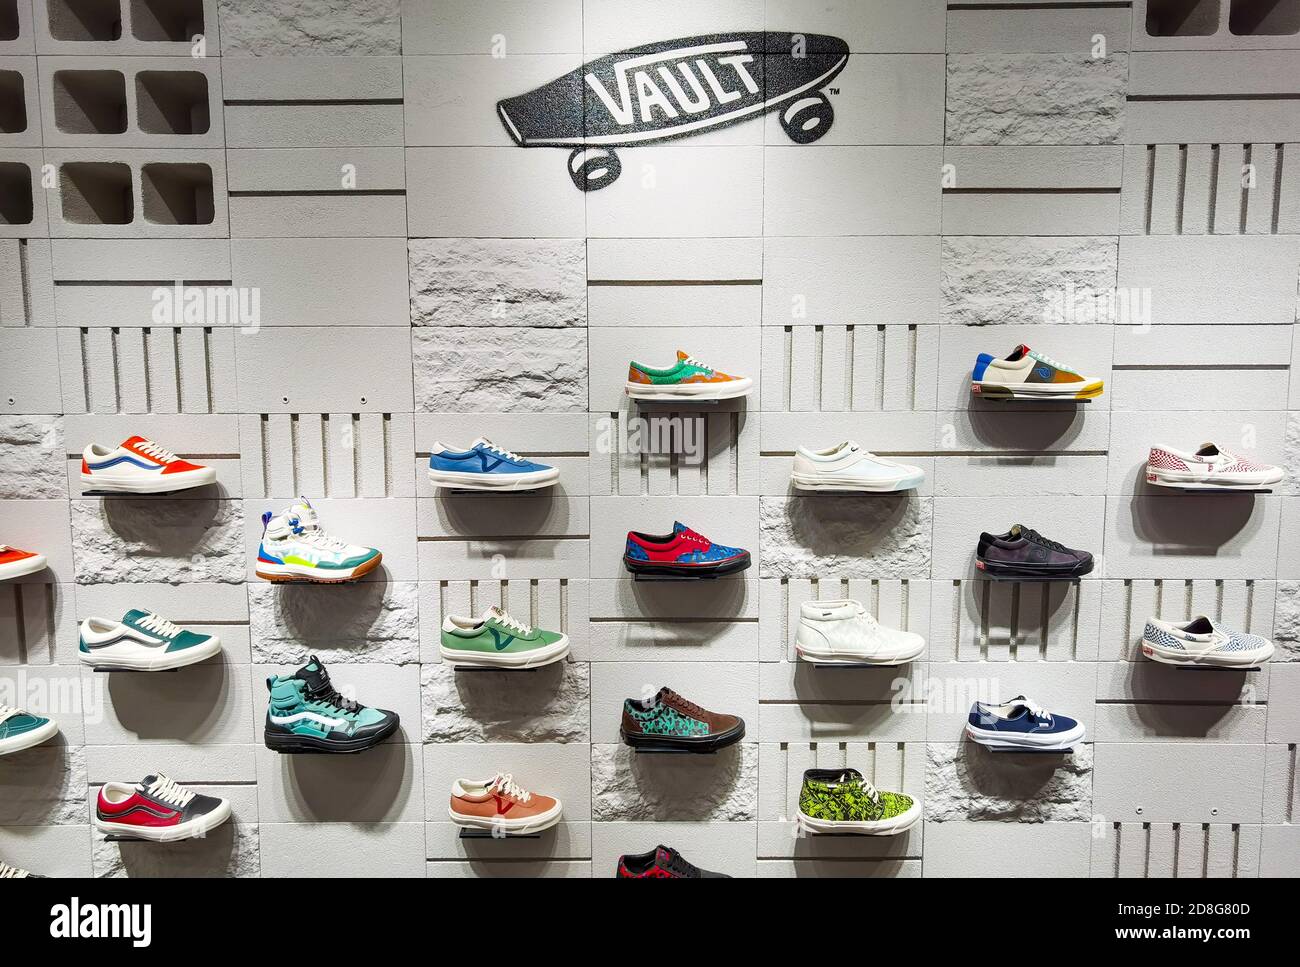 Page 3 - Vans Shop High Resolution Stock Photography and Images - Alamy